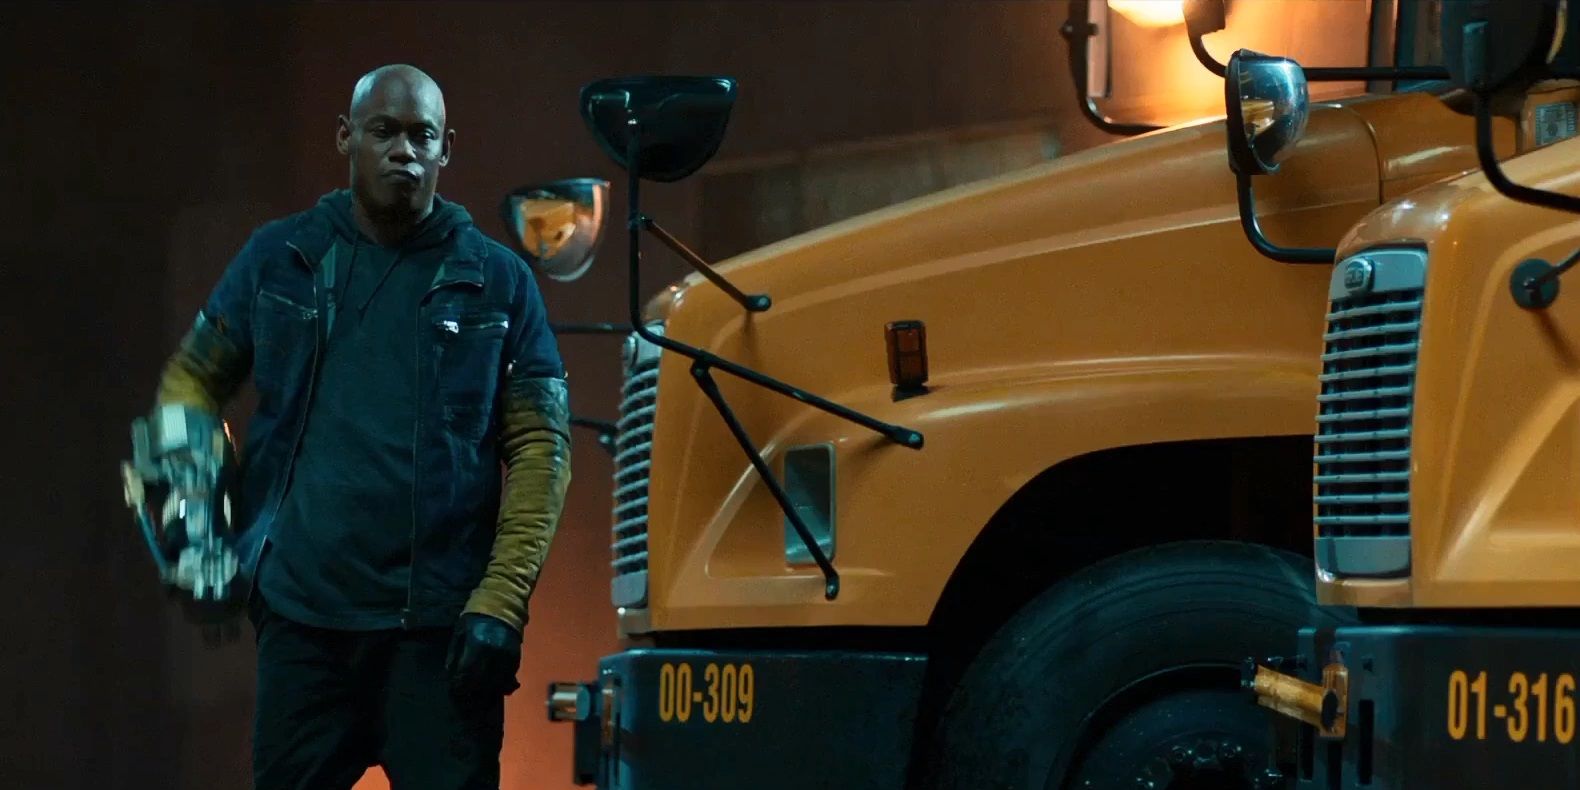 The Shocker by a school bus in Spider-Man Homecoming